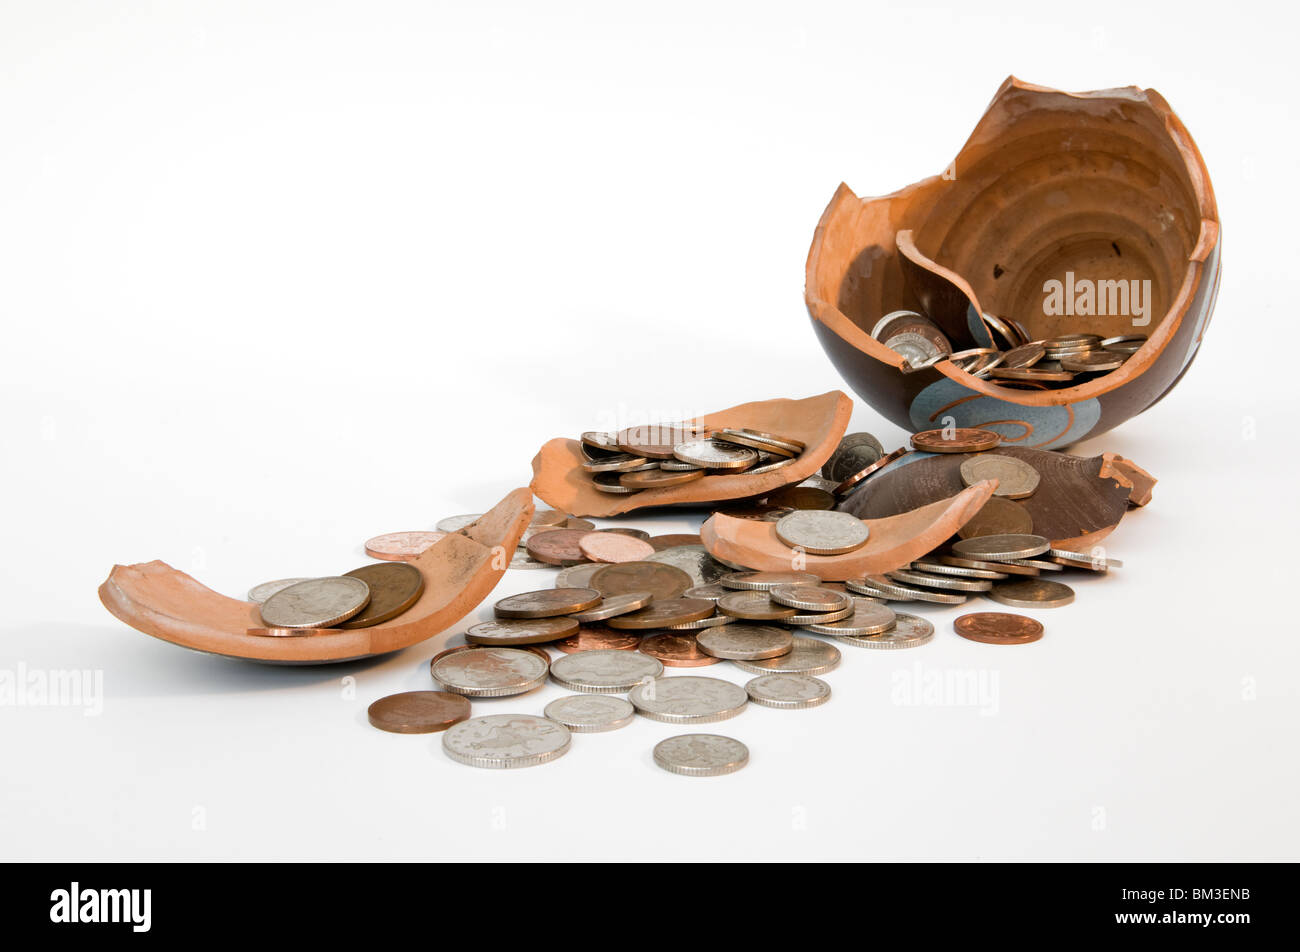 Broken terramundi savings pot with money spilling out over table against a white background Stock Photo